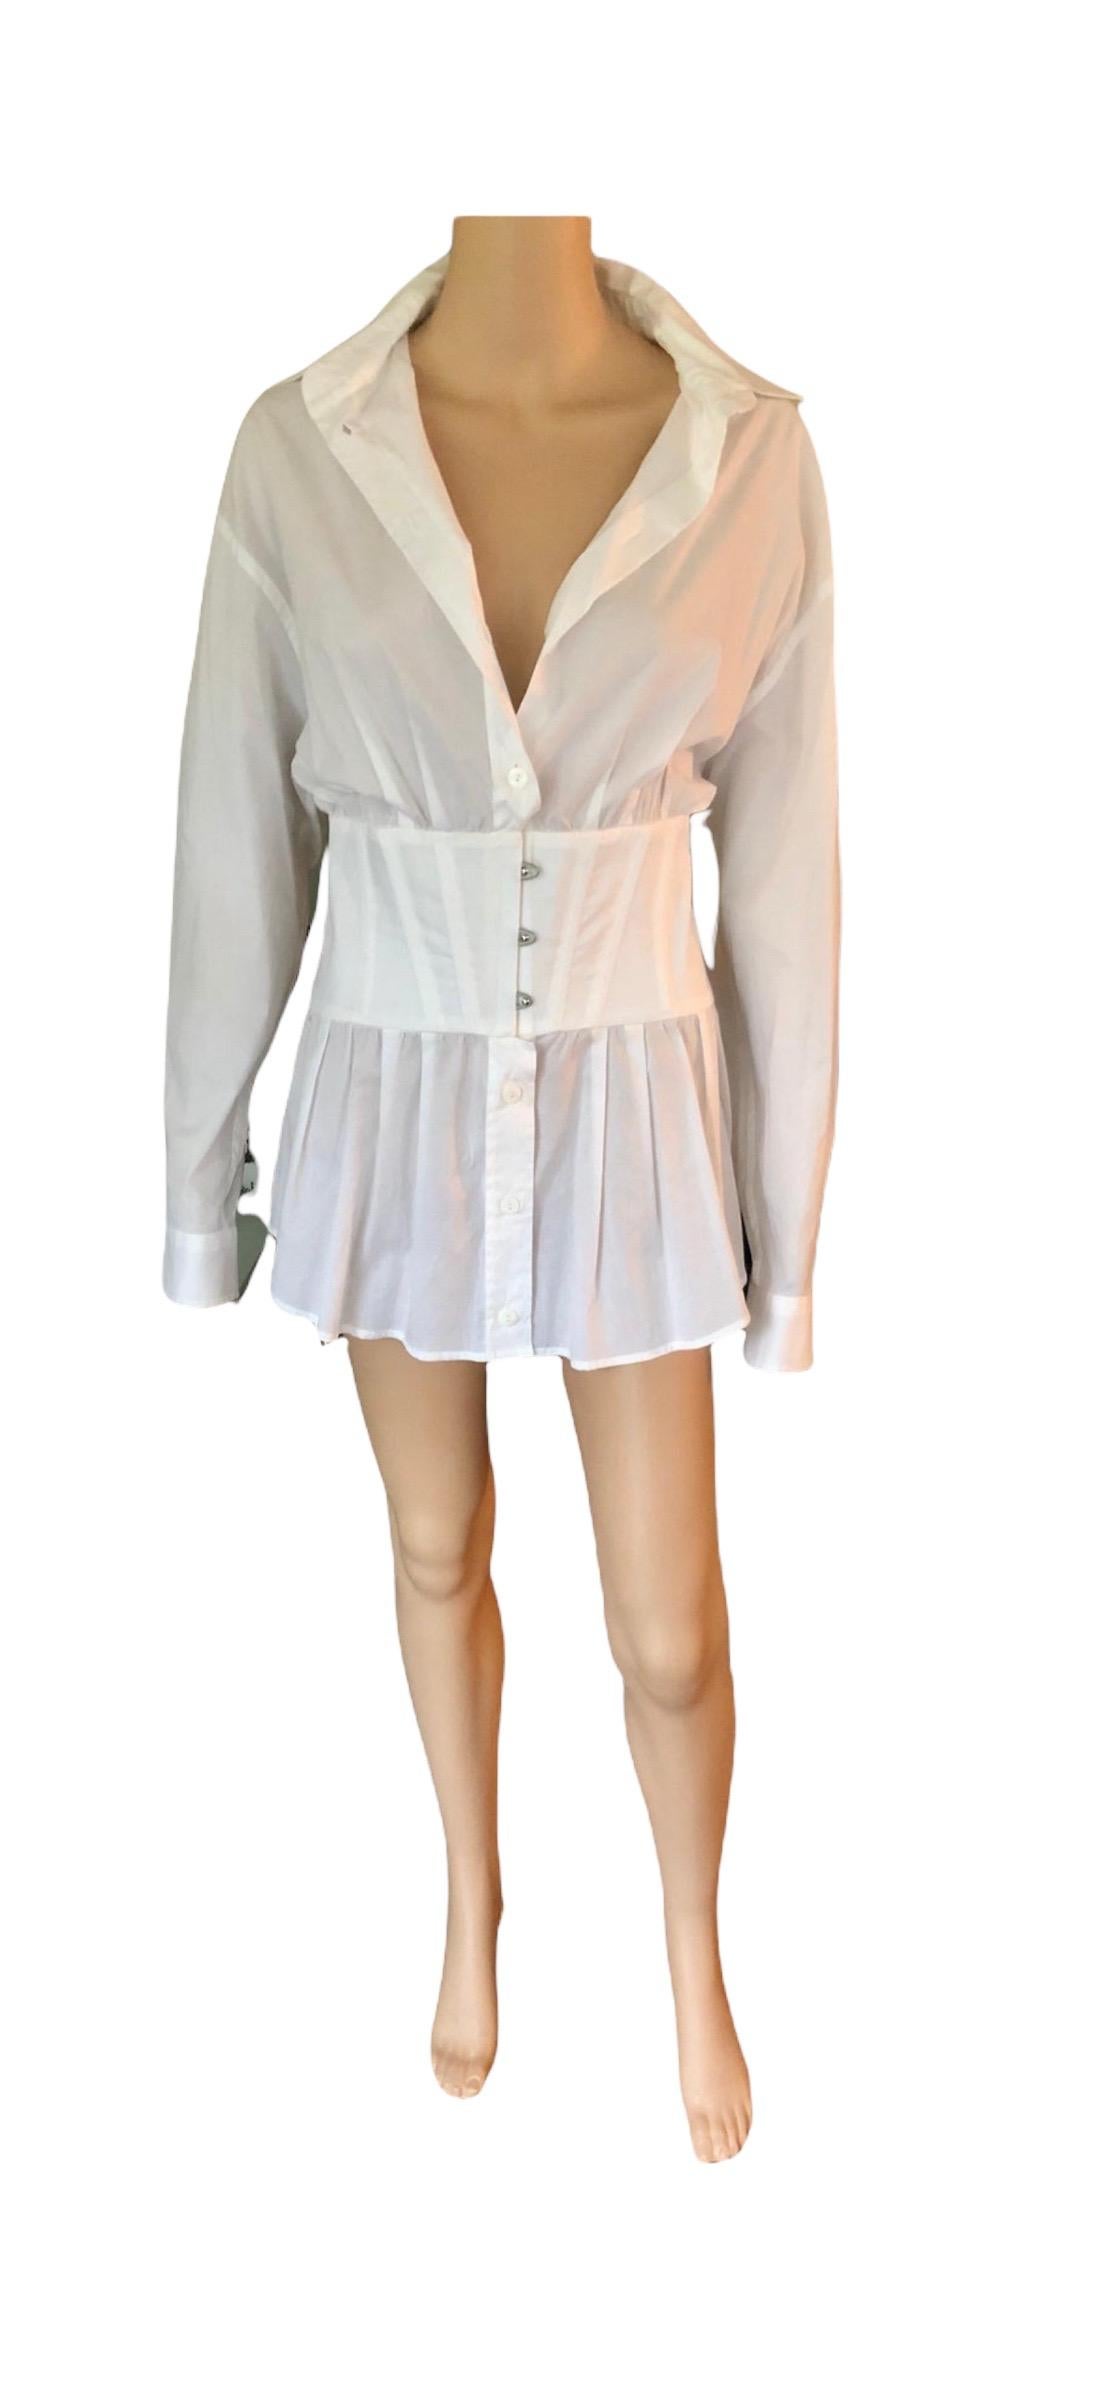 Jean Paul Gaultier Vintage Corset White Shirt Dress In Good Condition For Sale In Naples, FL